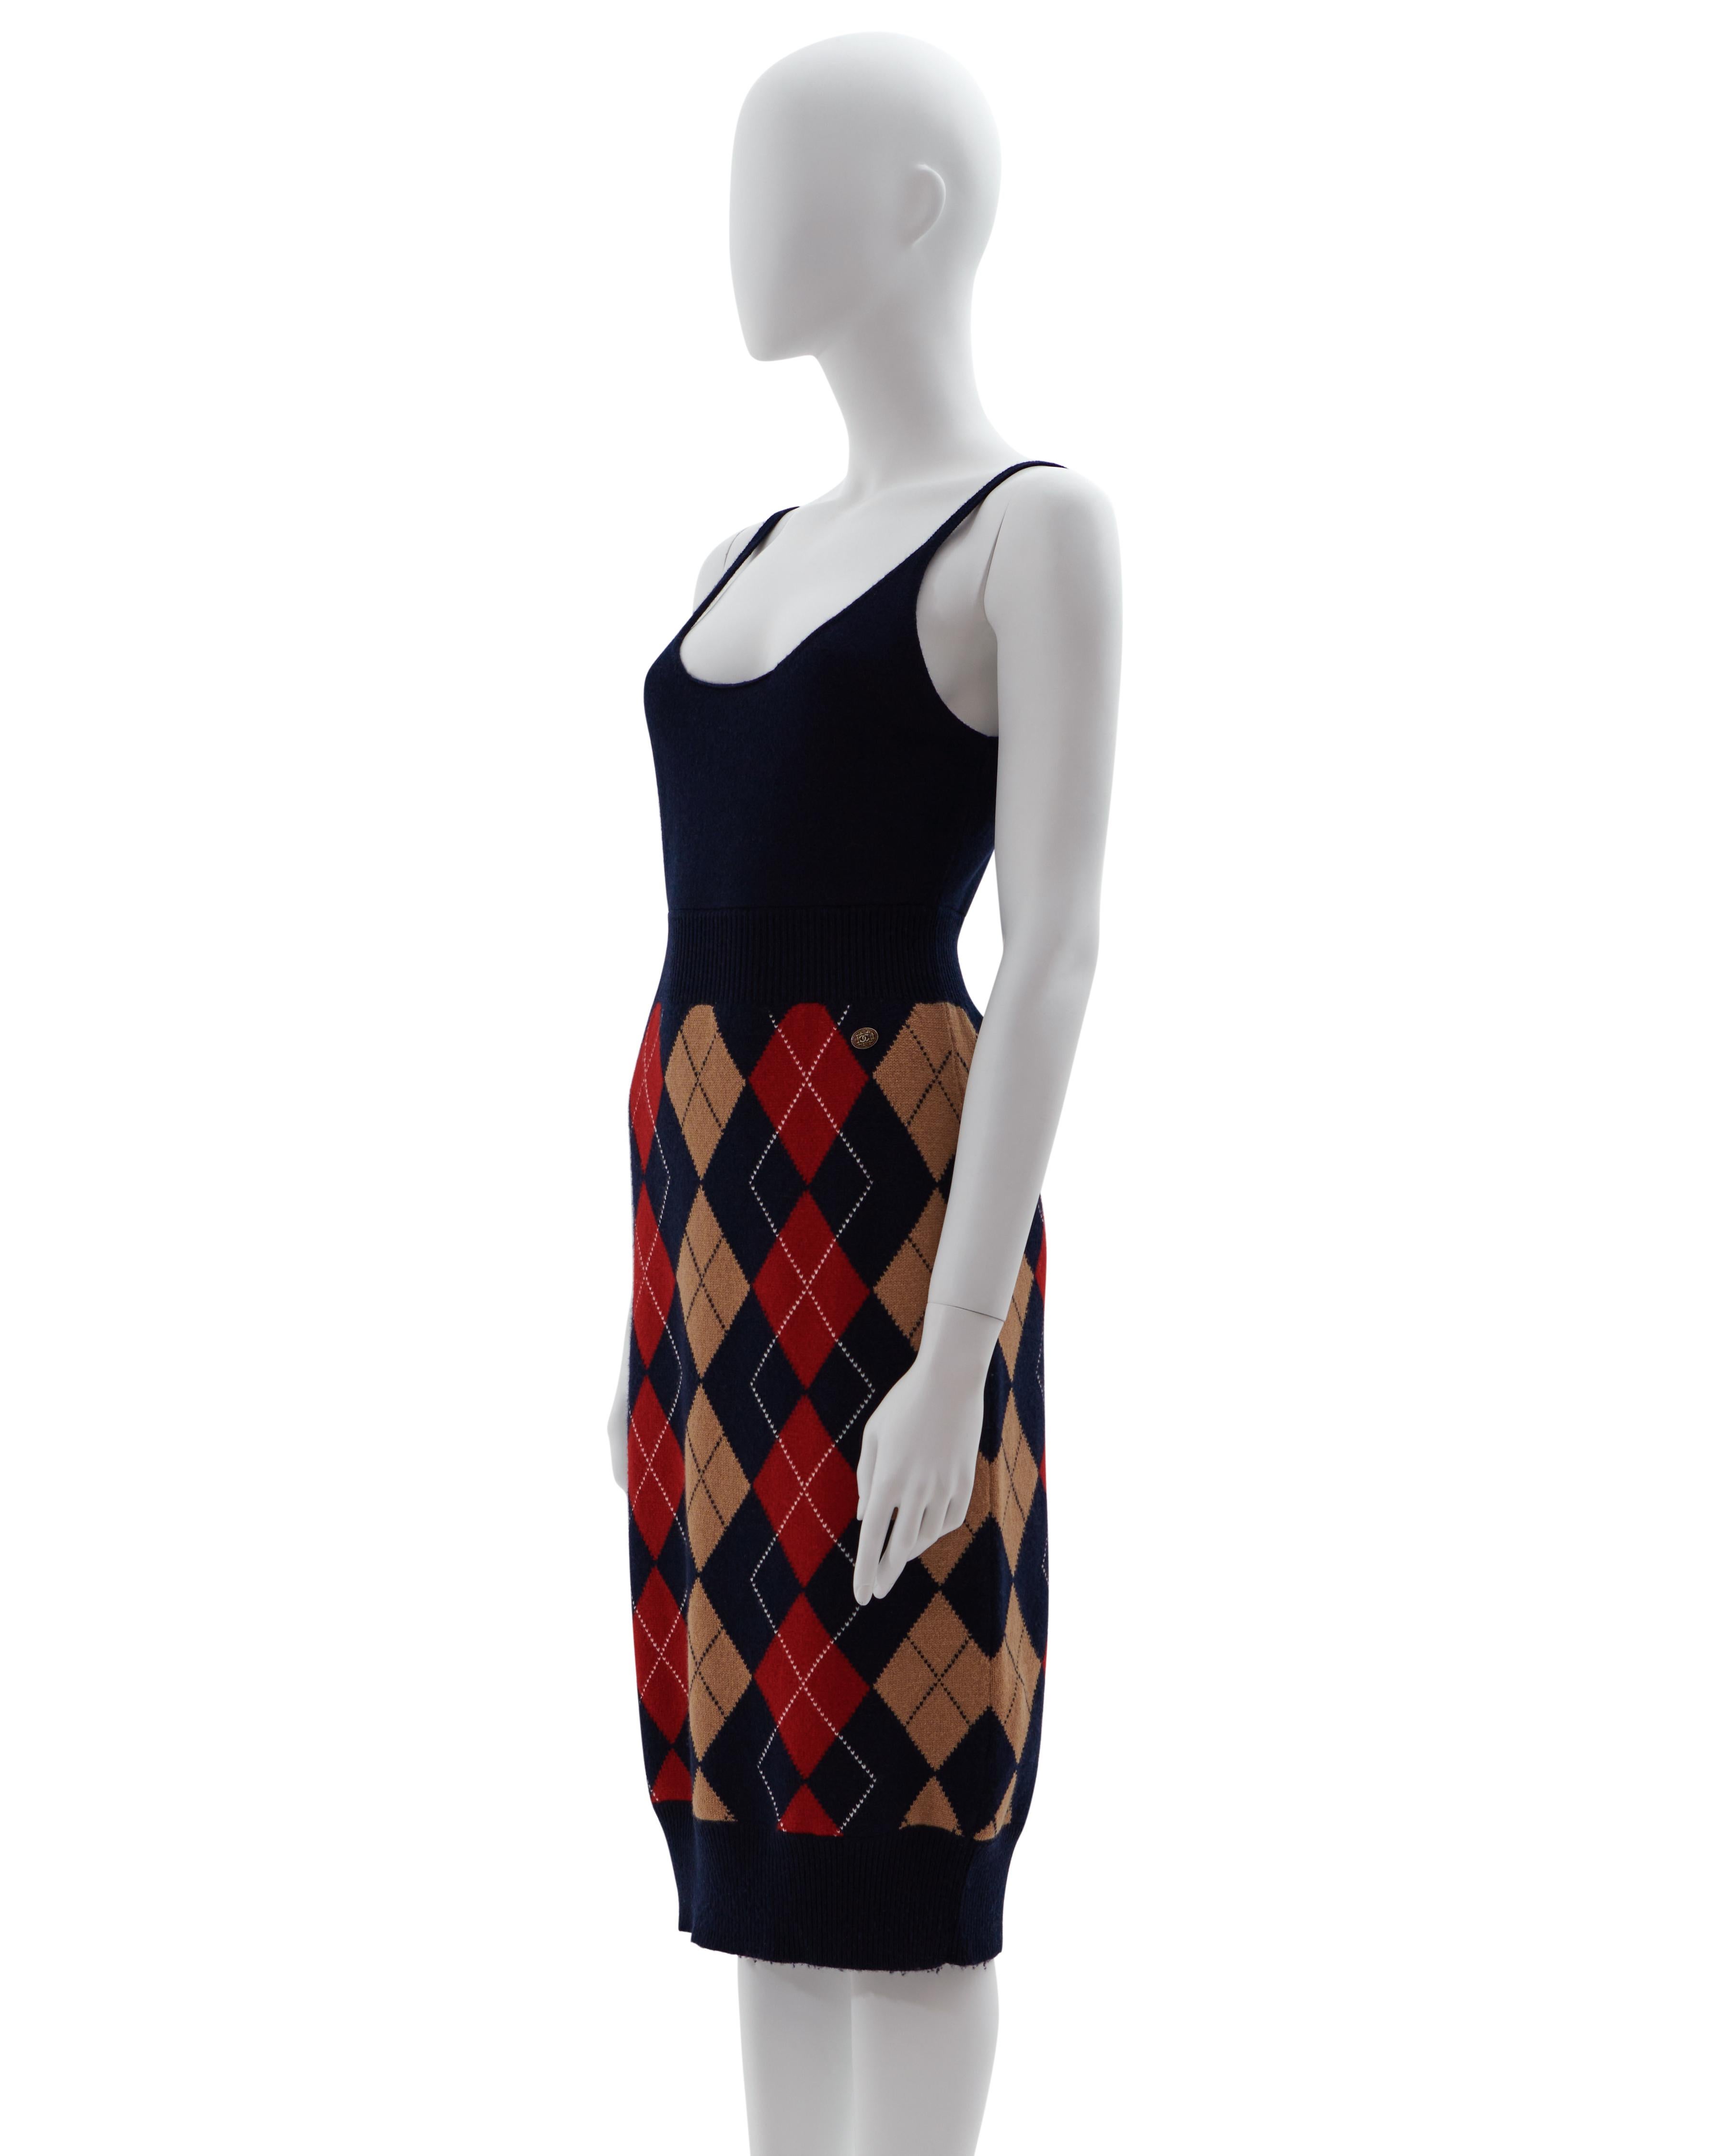 - Pre-Fall 2013
- Sold by Skof.Archive 
- Designed by Karl Lagerfeld 
- Blue, beige and burgundy argyle dress
- Sleveless 
- Scoop neckline 
- Made in England 

Condition: Excellent 
Wear consistent with age and use. Light wear from age and use